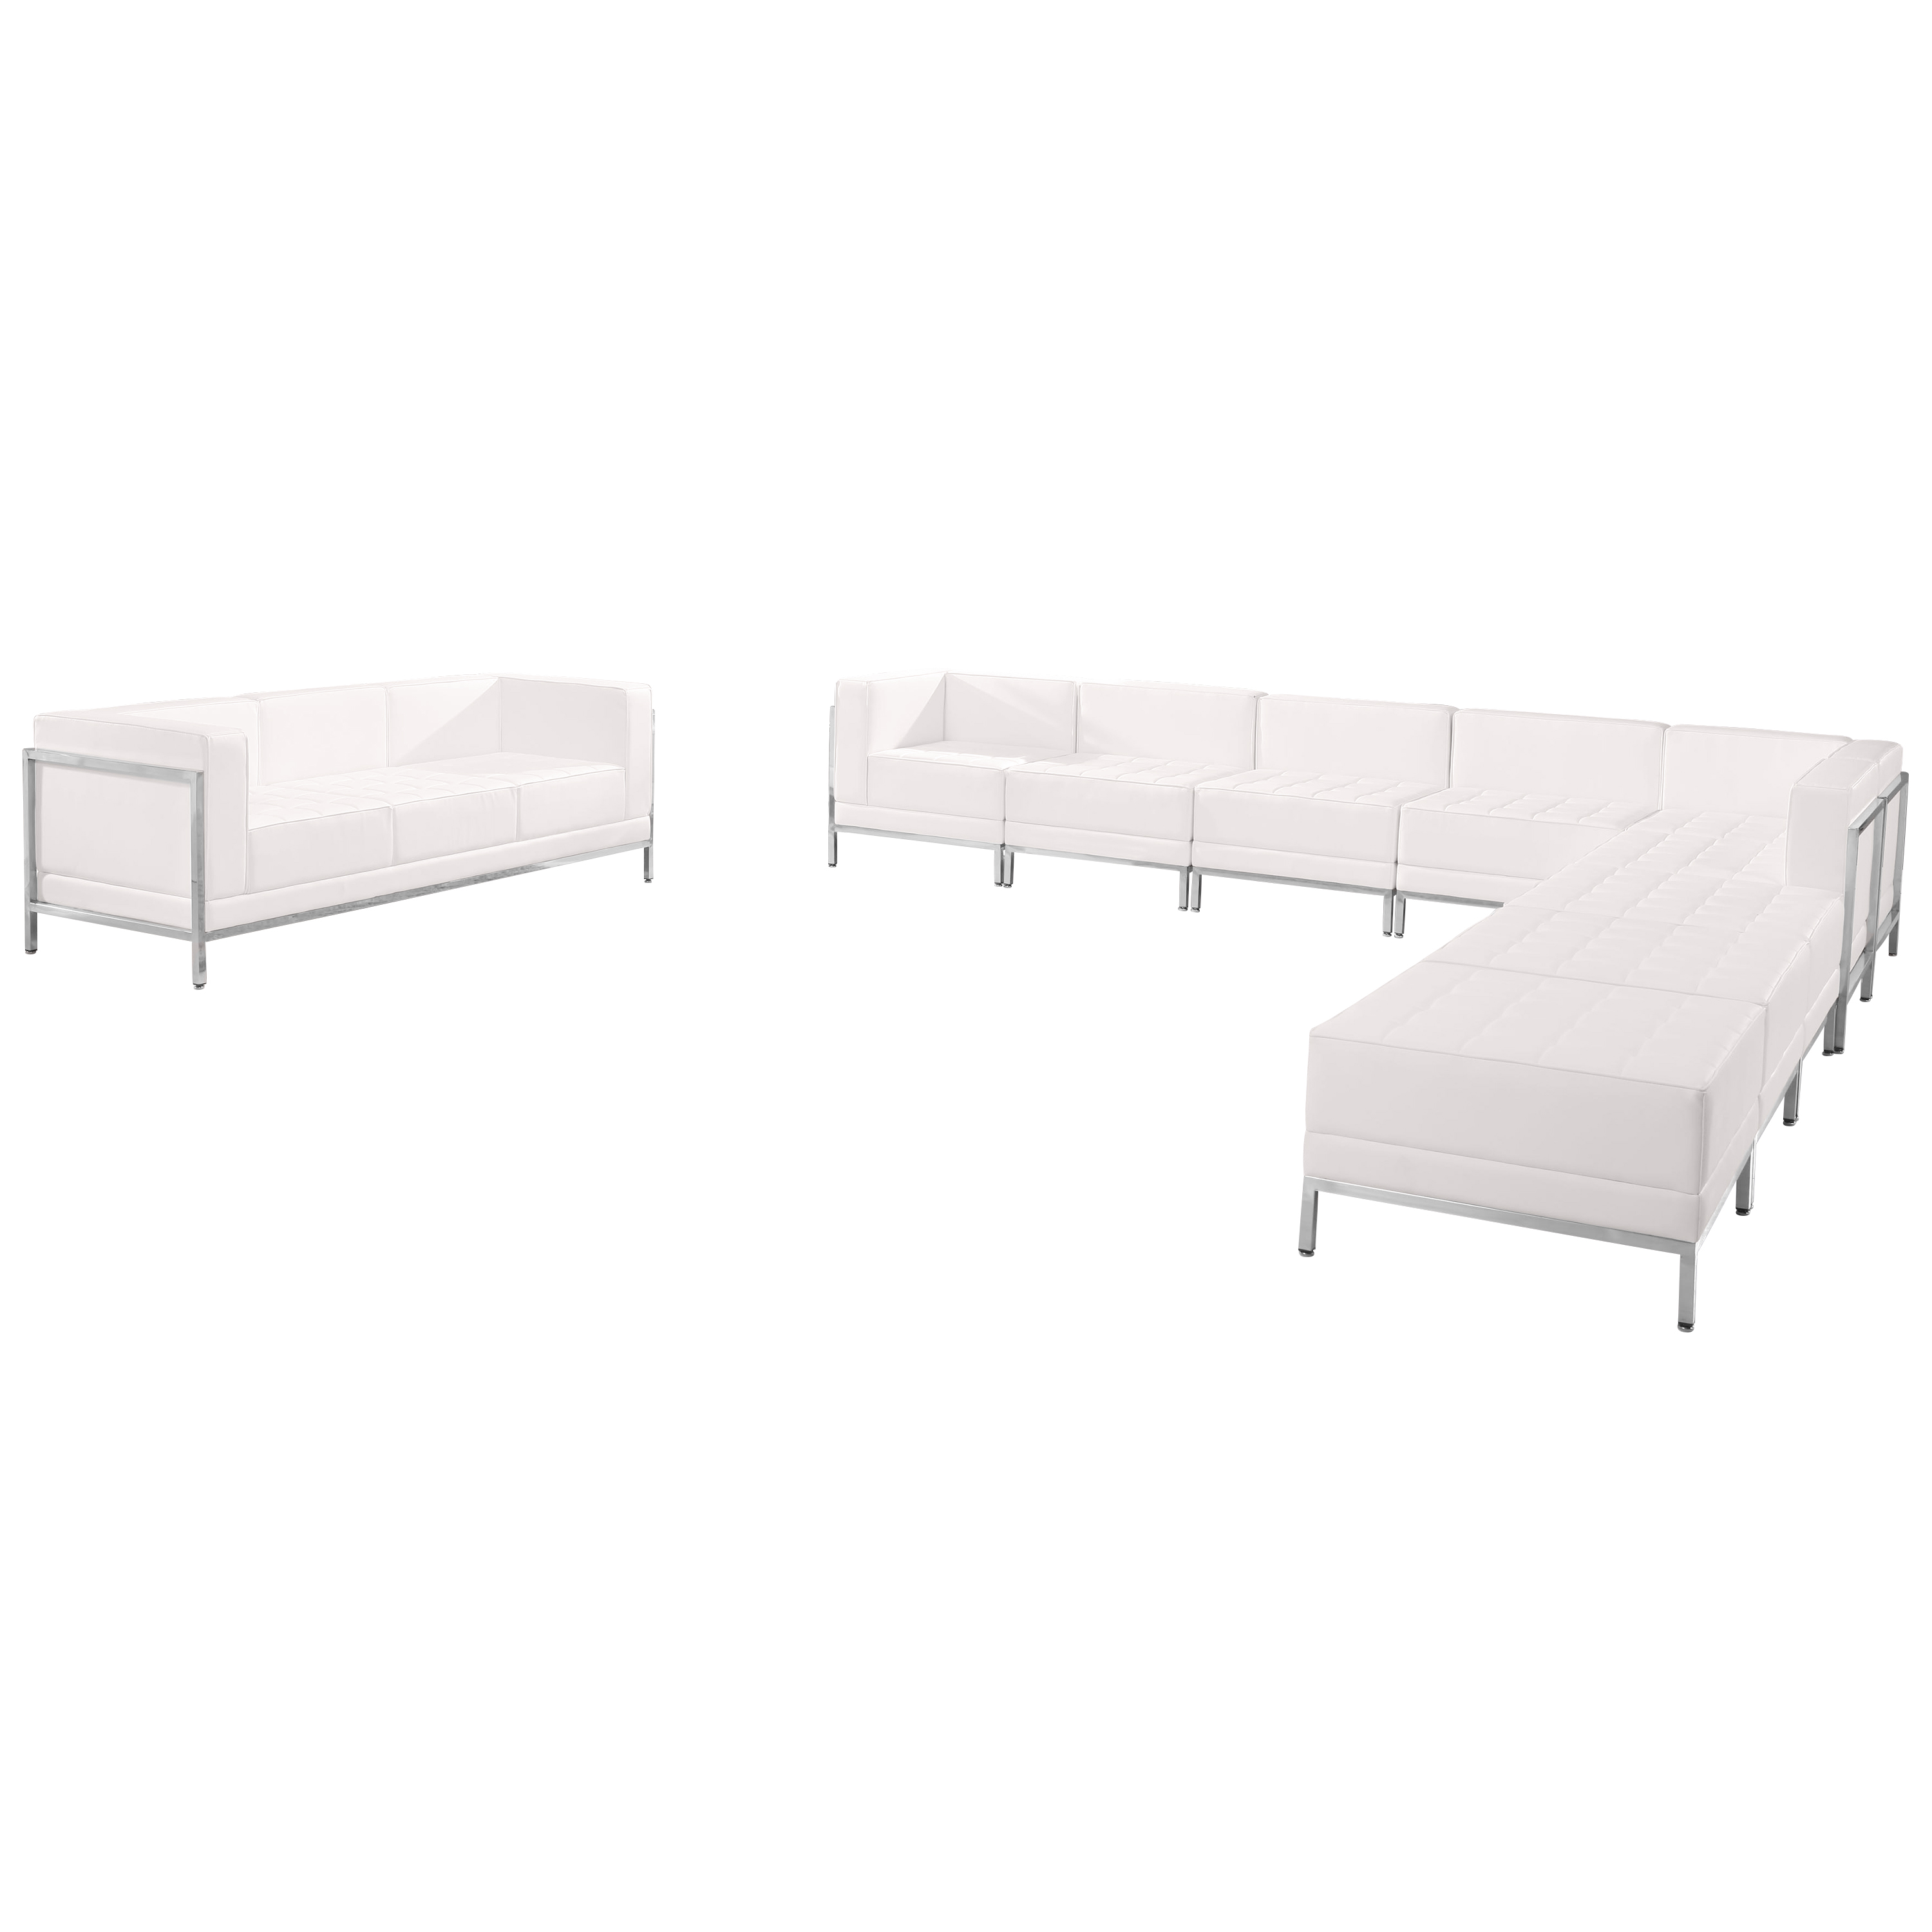 Flash Furniture ZB-IMAG-SET19-WH-GG Hercules Imagination Series White LeatherSoft Sectional & Sofa Set, 10 Pieces